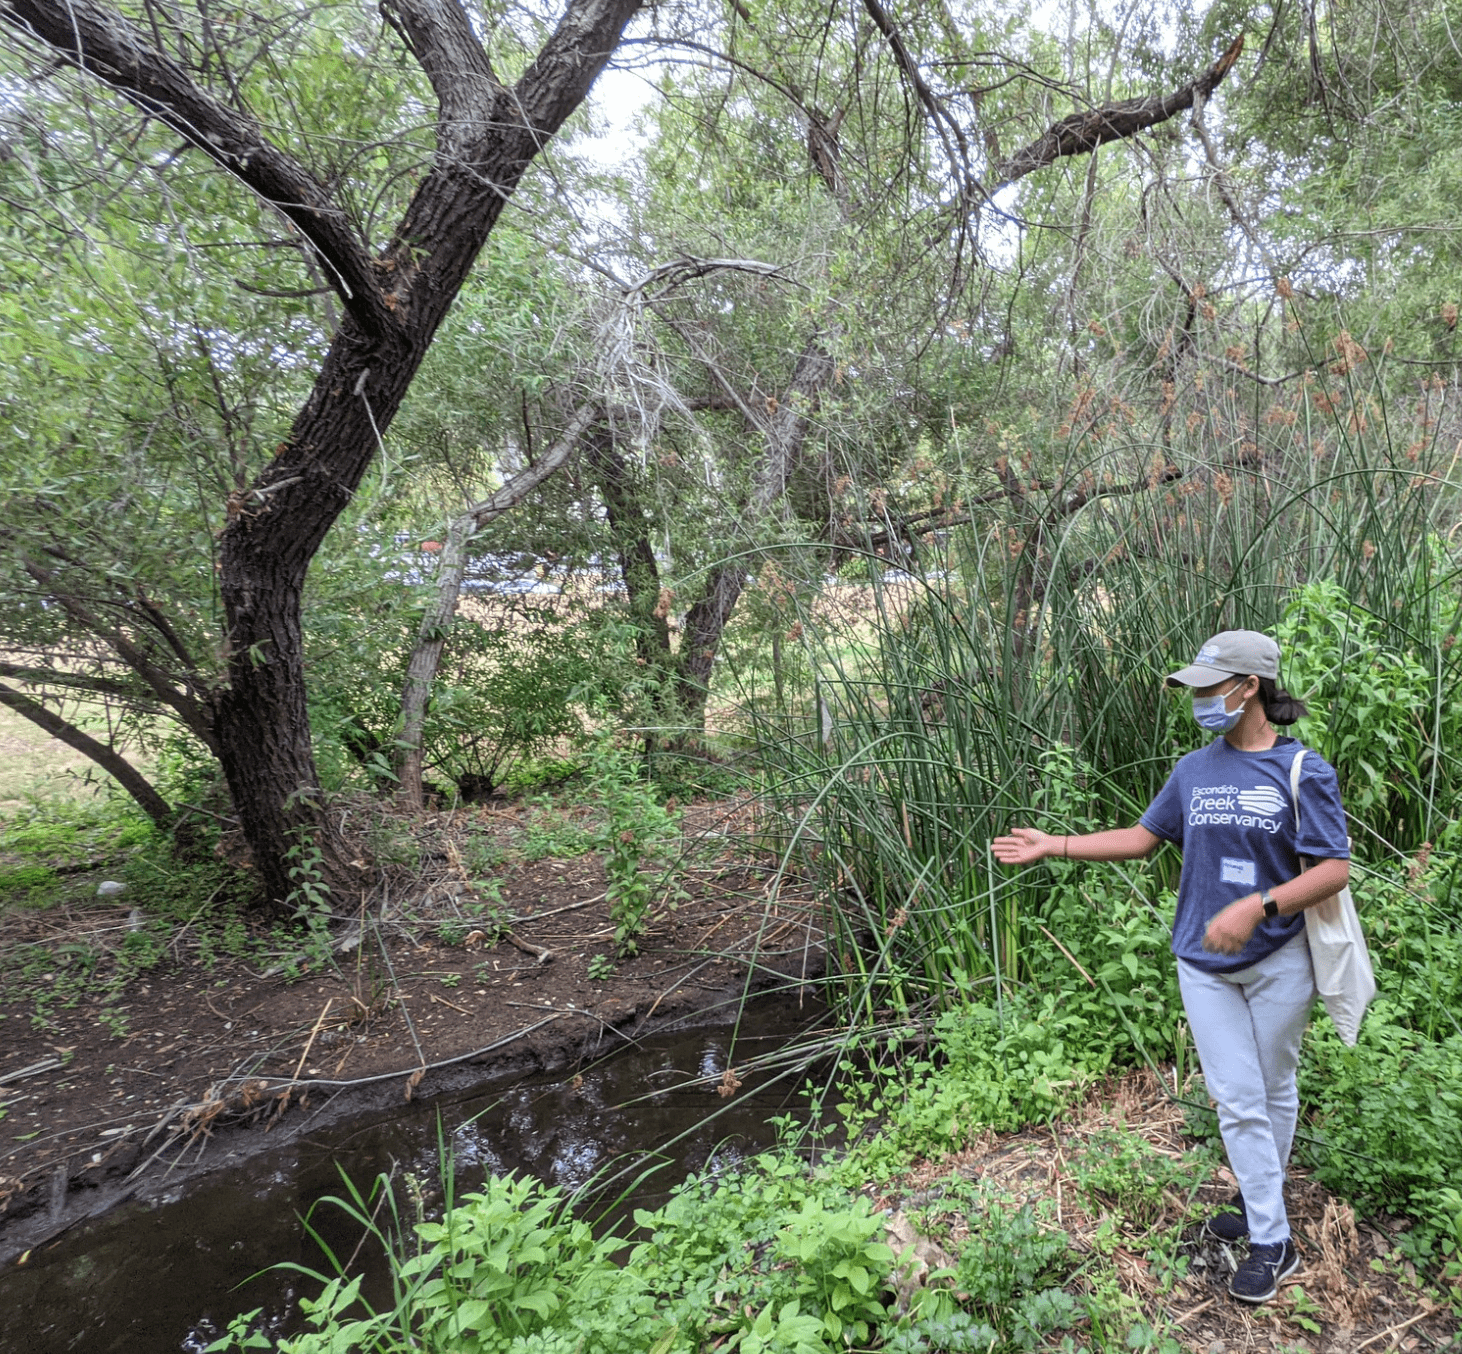 A High School student in blue jeans, blue t-shirt, cap and medical masks directs attention to a creek nearby. Green ferns and plants line the banks of the creek under thick tree cover.